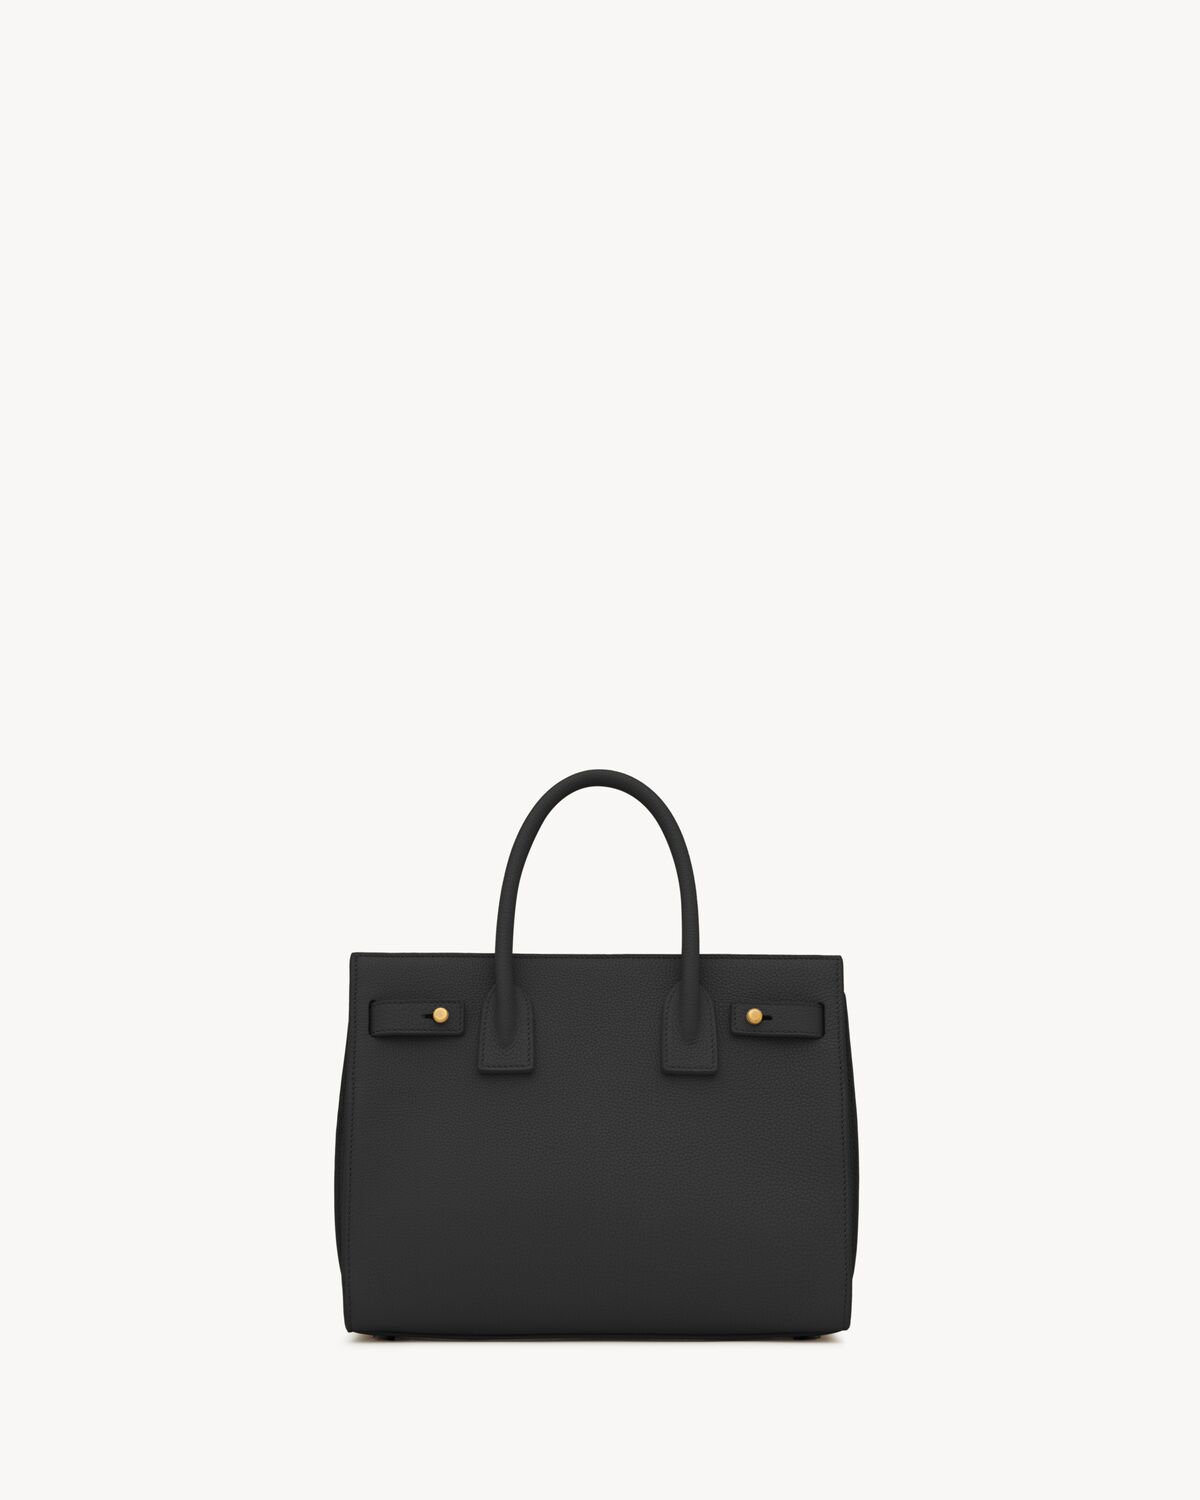 SAC DE JOUR BABY IN SUPPLE GRAINED LEATHER